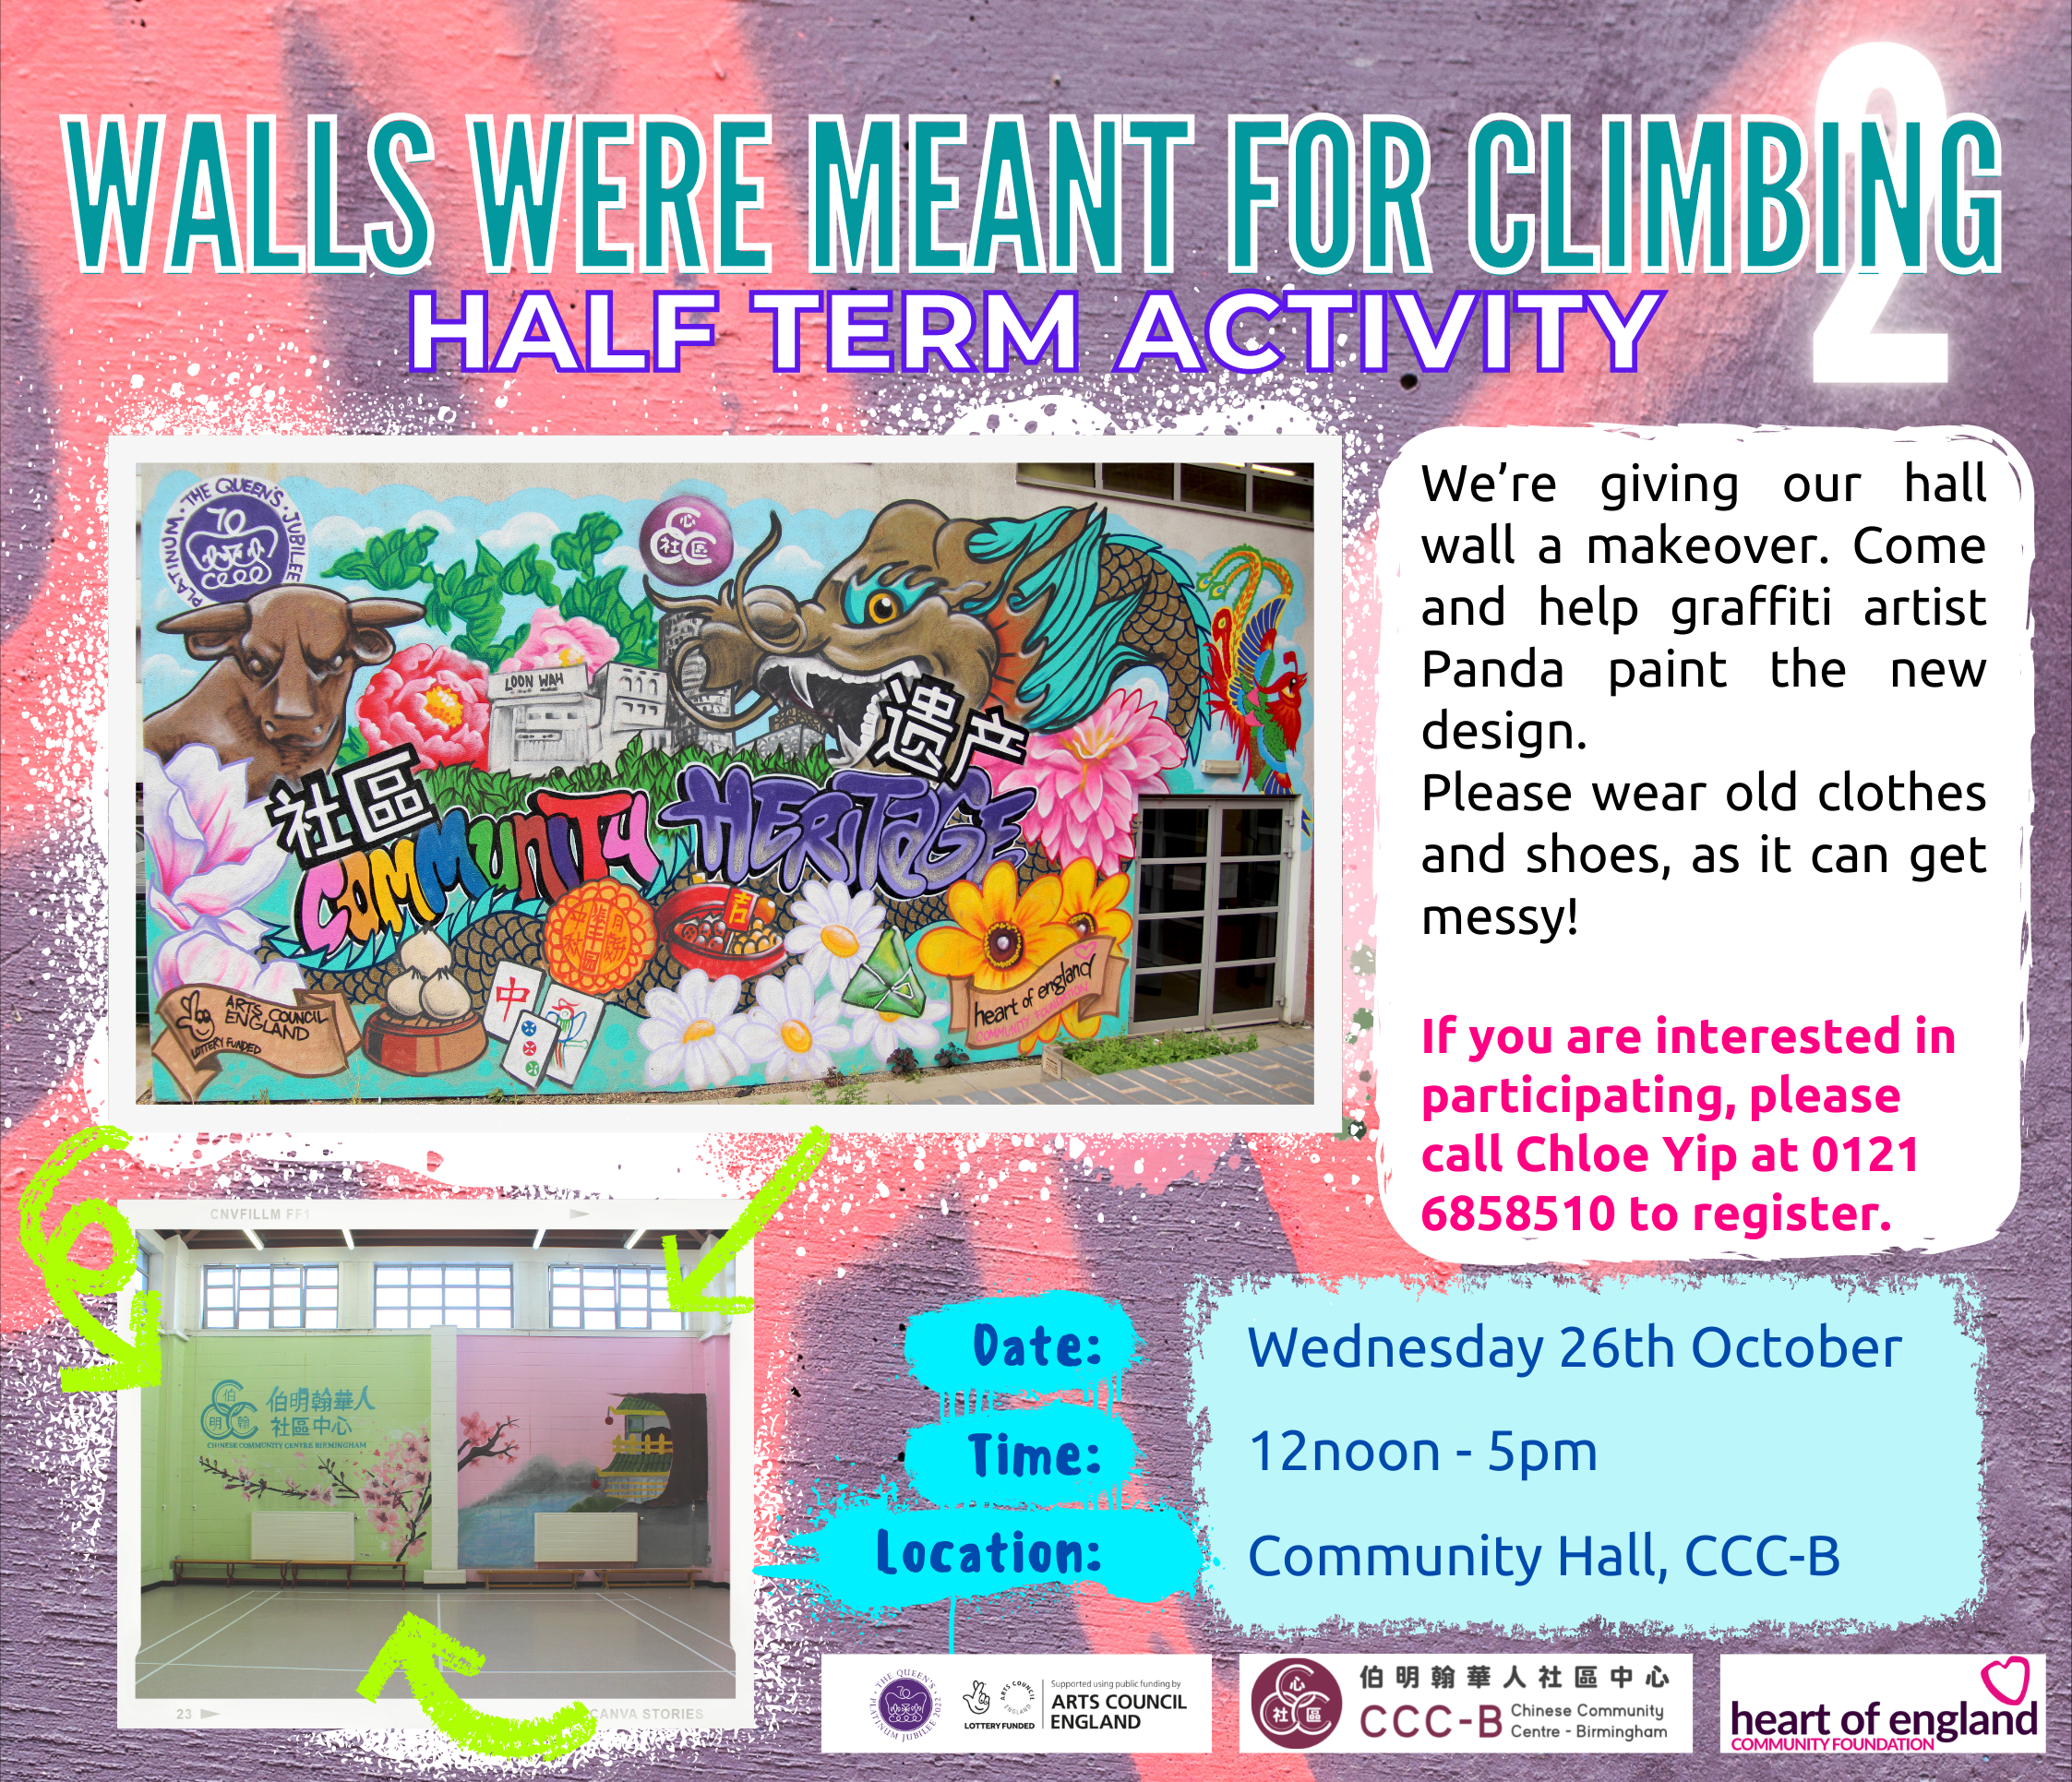 Walls were meant for climbing 2 – Half Term Activity